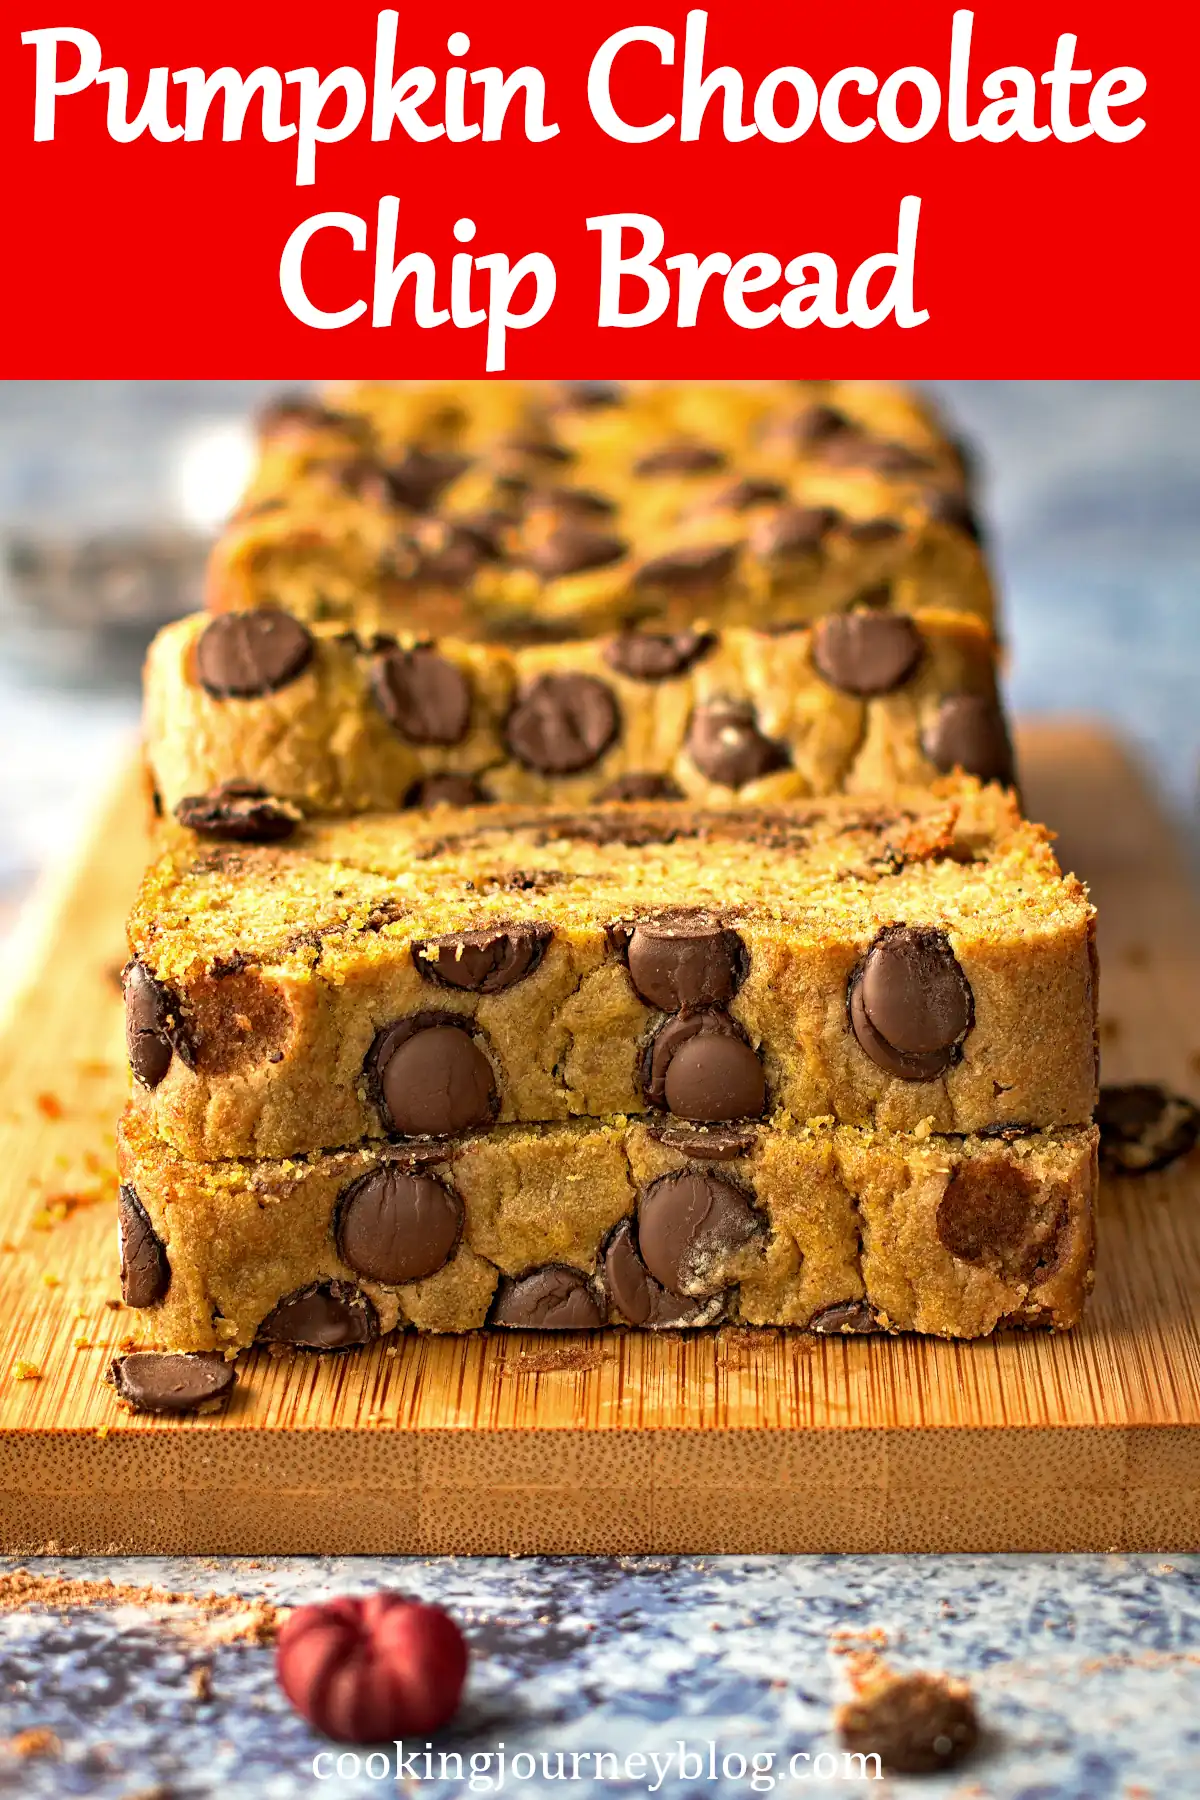 Pumpkin chocolate chip bread slices are great served for breakfast with a cup of tea or coffee. Easy fall recipe to make for your family. Healthy and delicious.